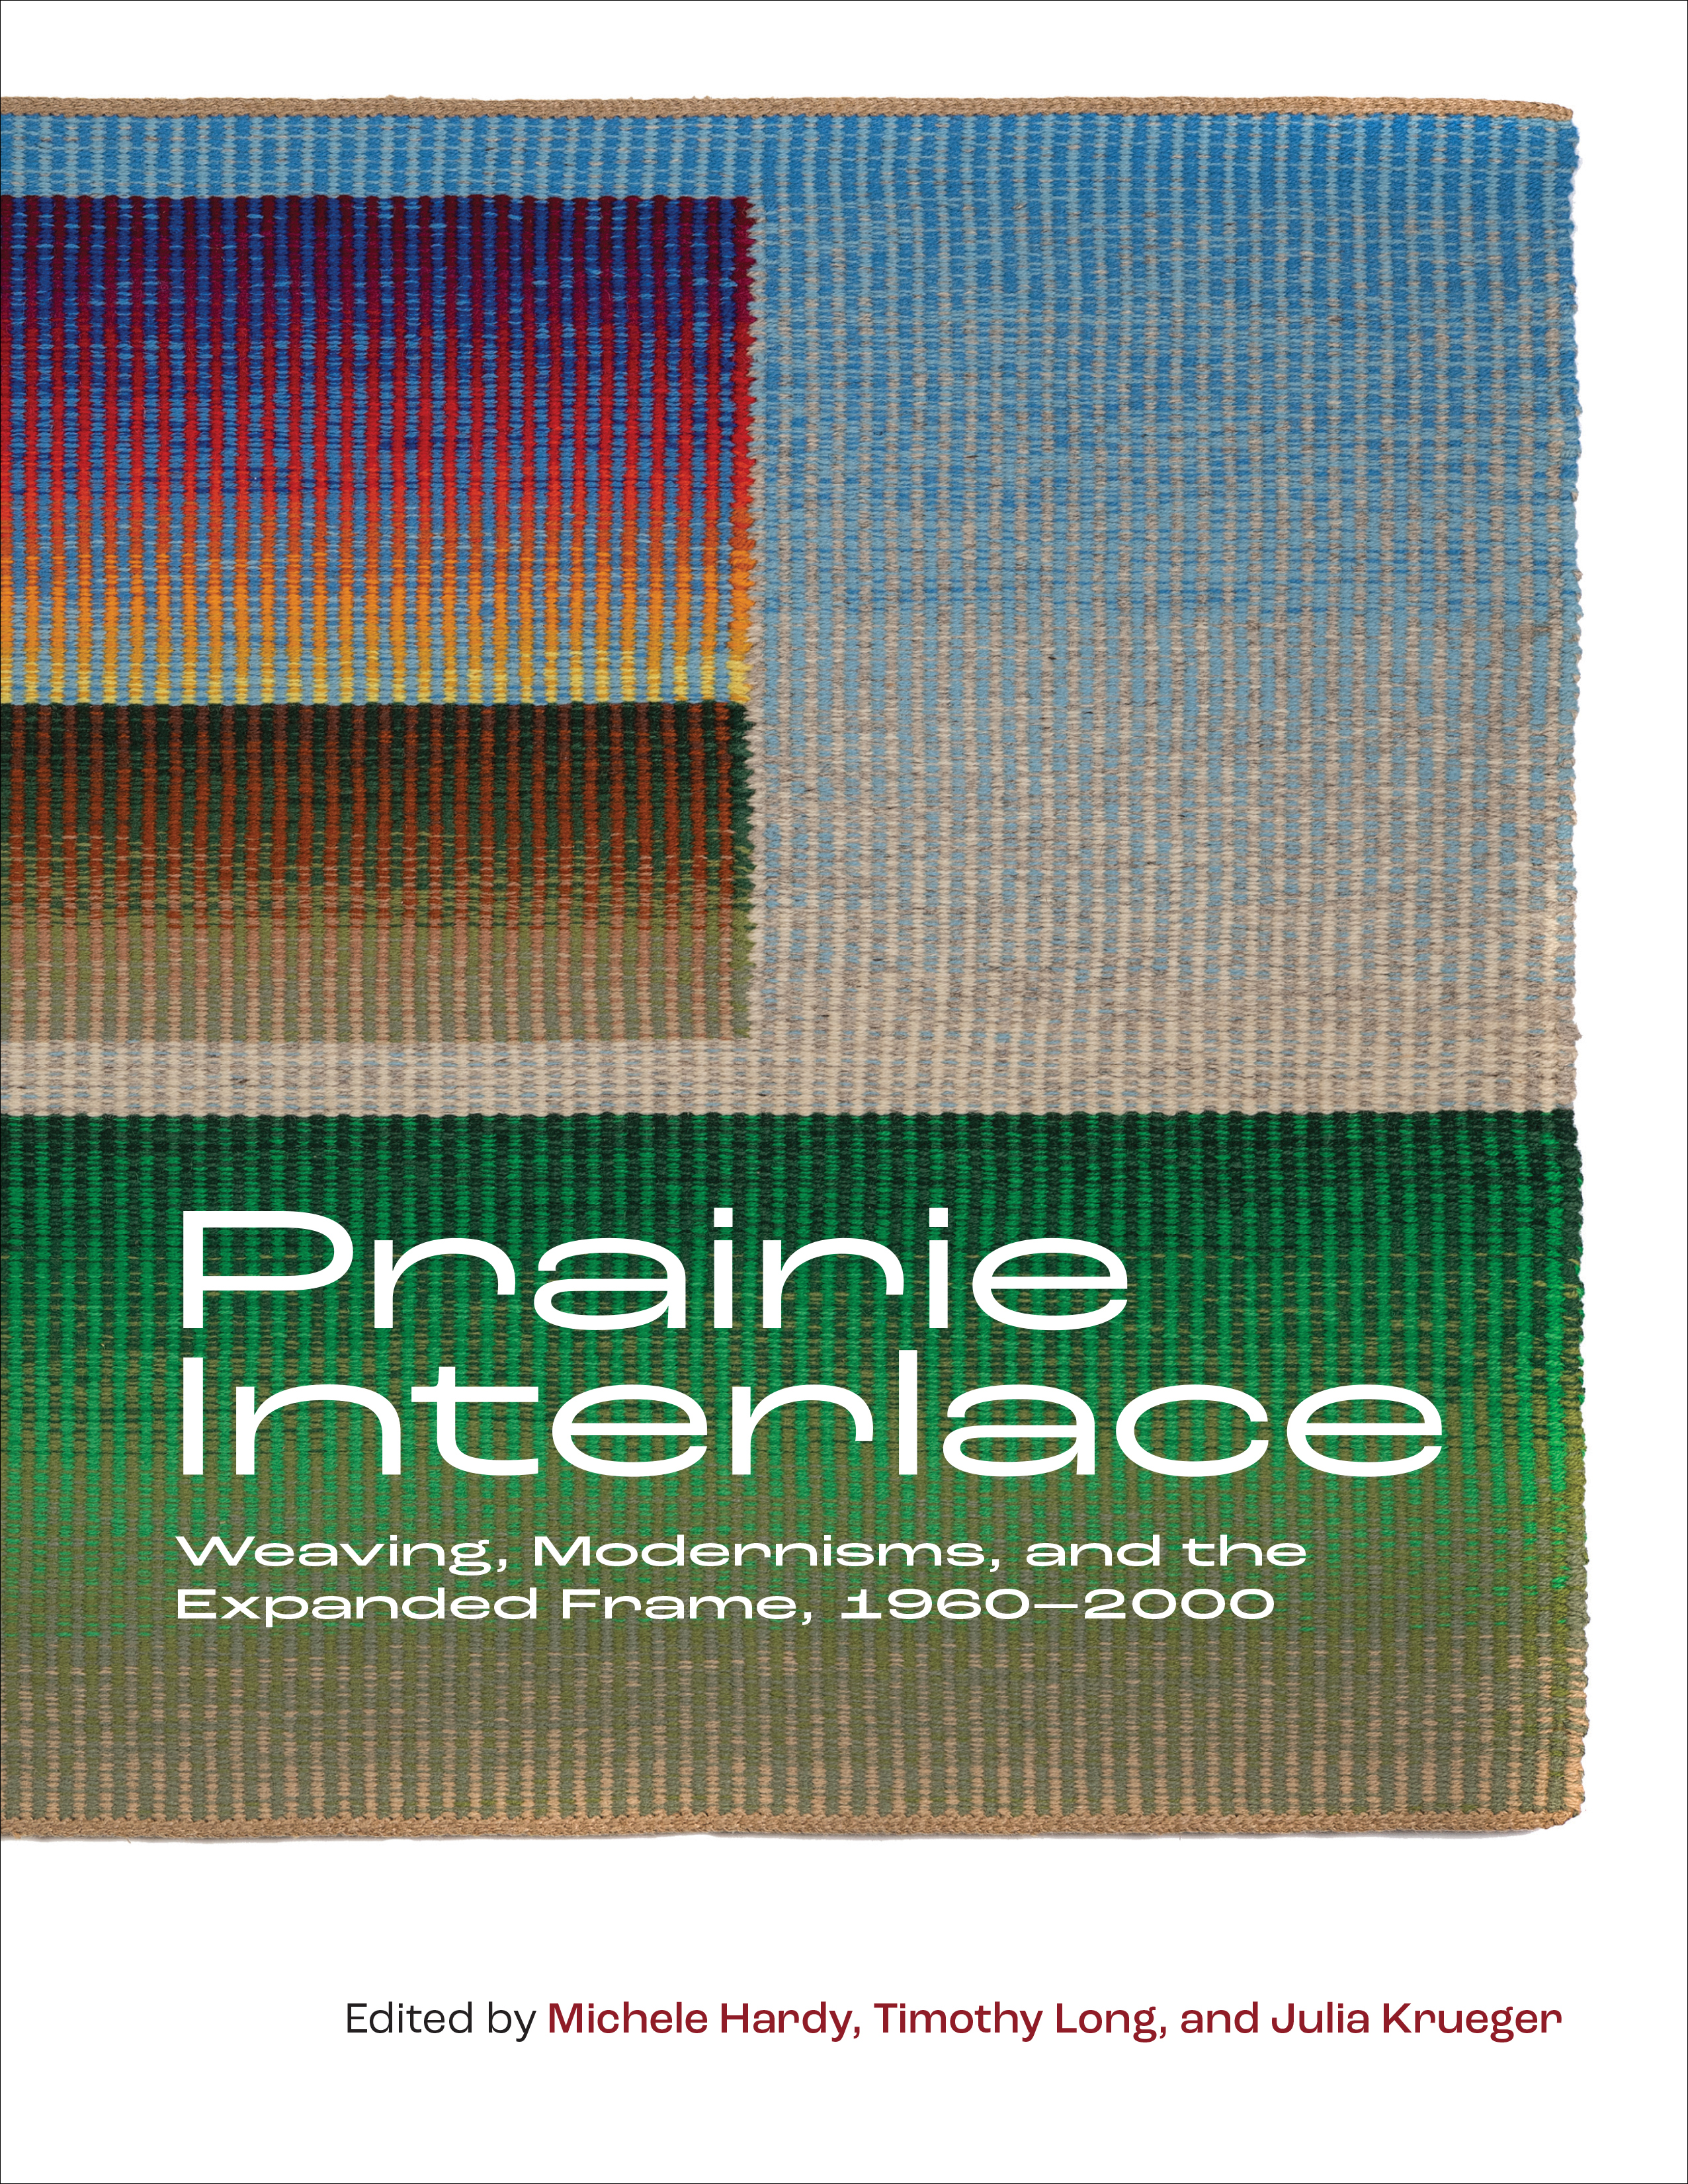 Cover Image for: Prairie Interlace